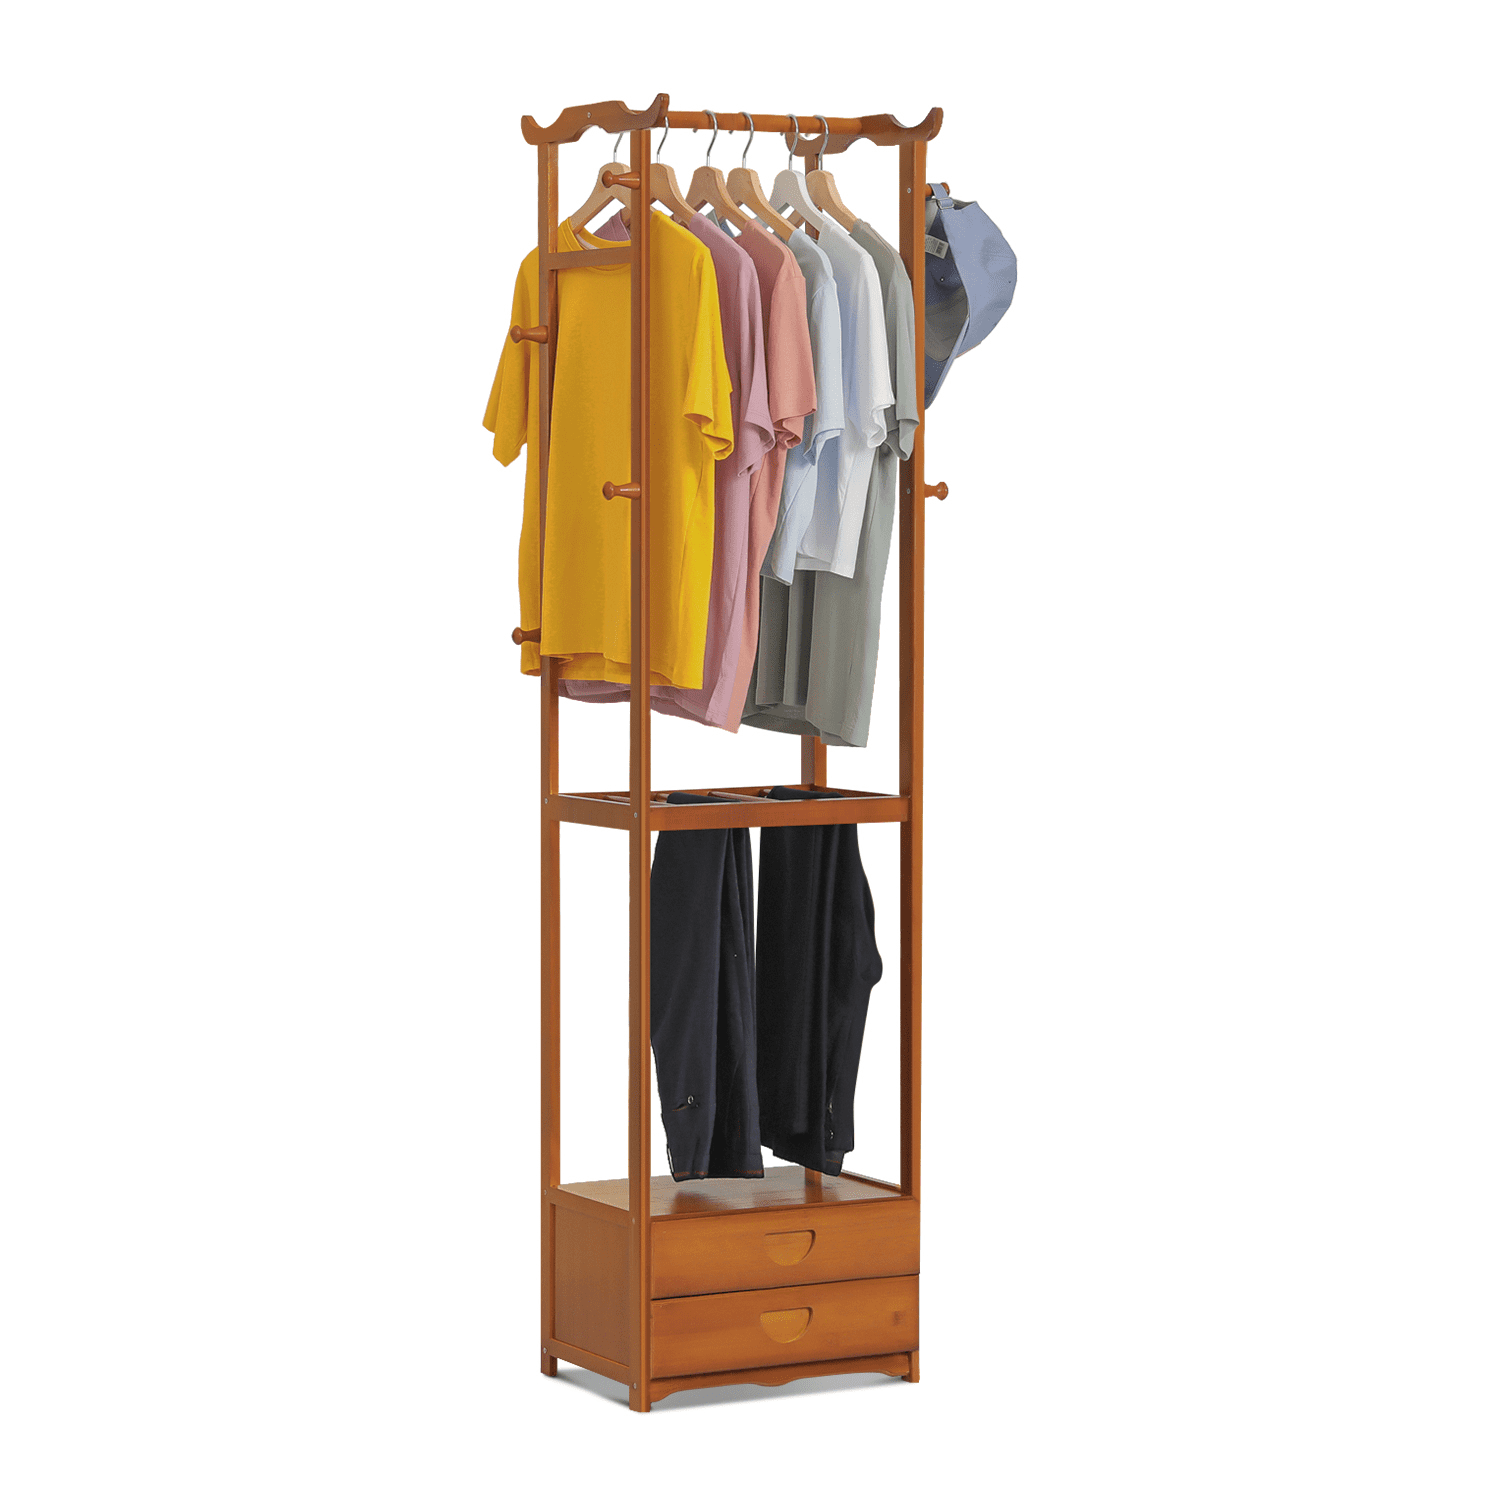 Top mounted pull-out pants rack MY-R502 - RMGhardware